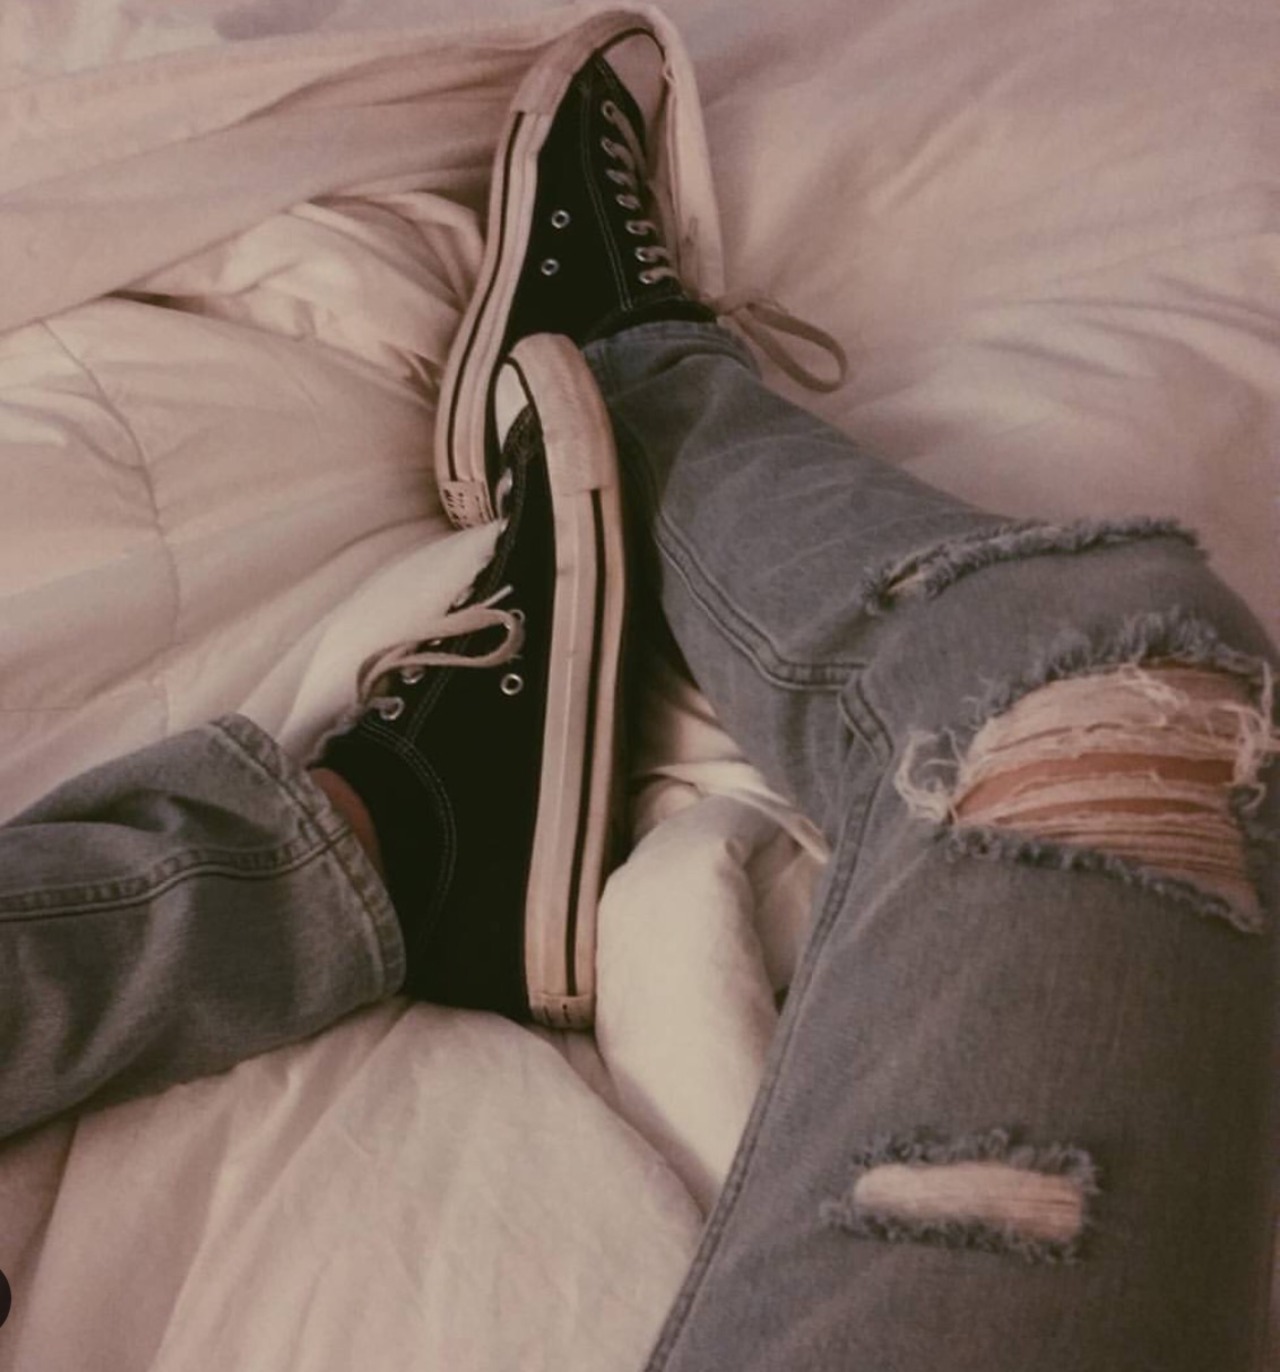 red-shoes-r-cool:  Converse in bed 